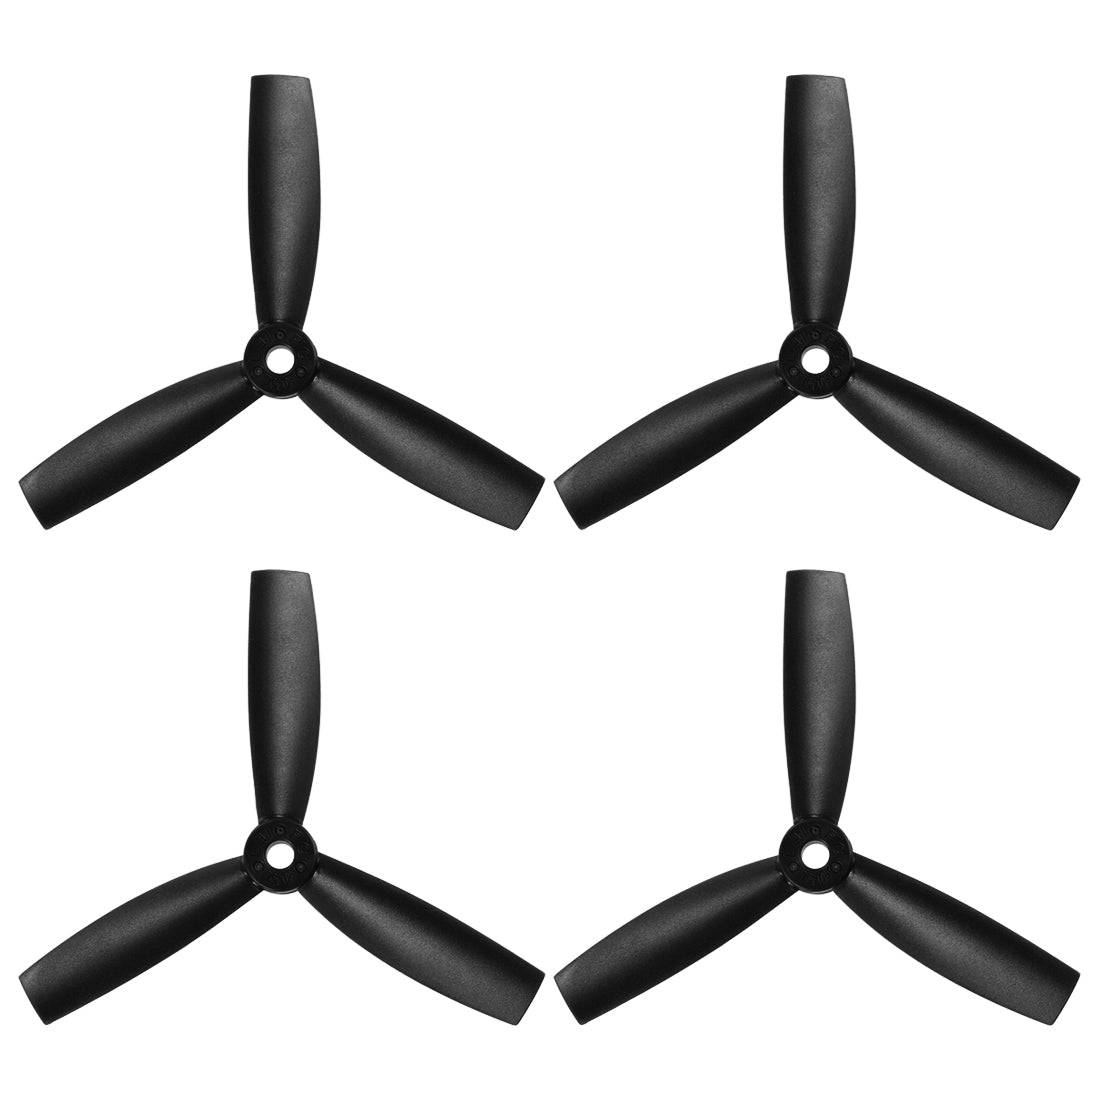 uxcell Uxcell RC Propellers 4045 4x4.5 Inch CW CCW 3-Vane for Quadcopter Multirotor Black 2 Pairs